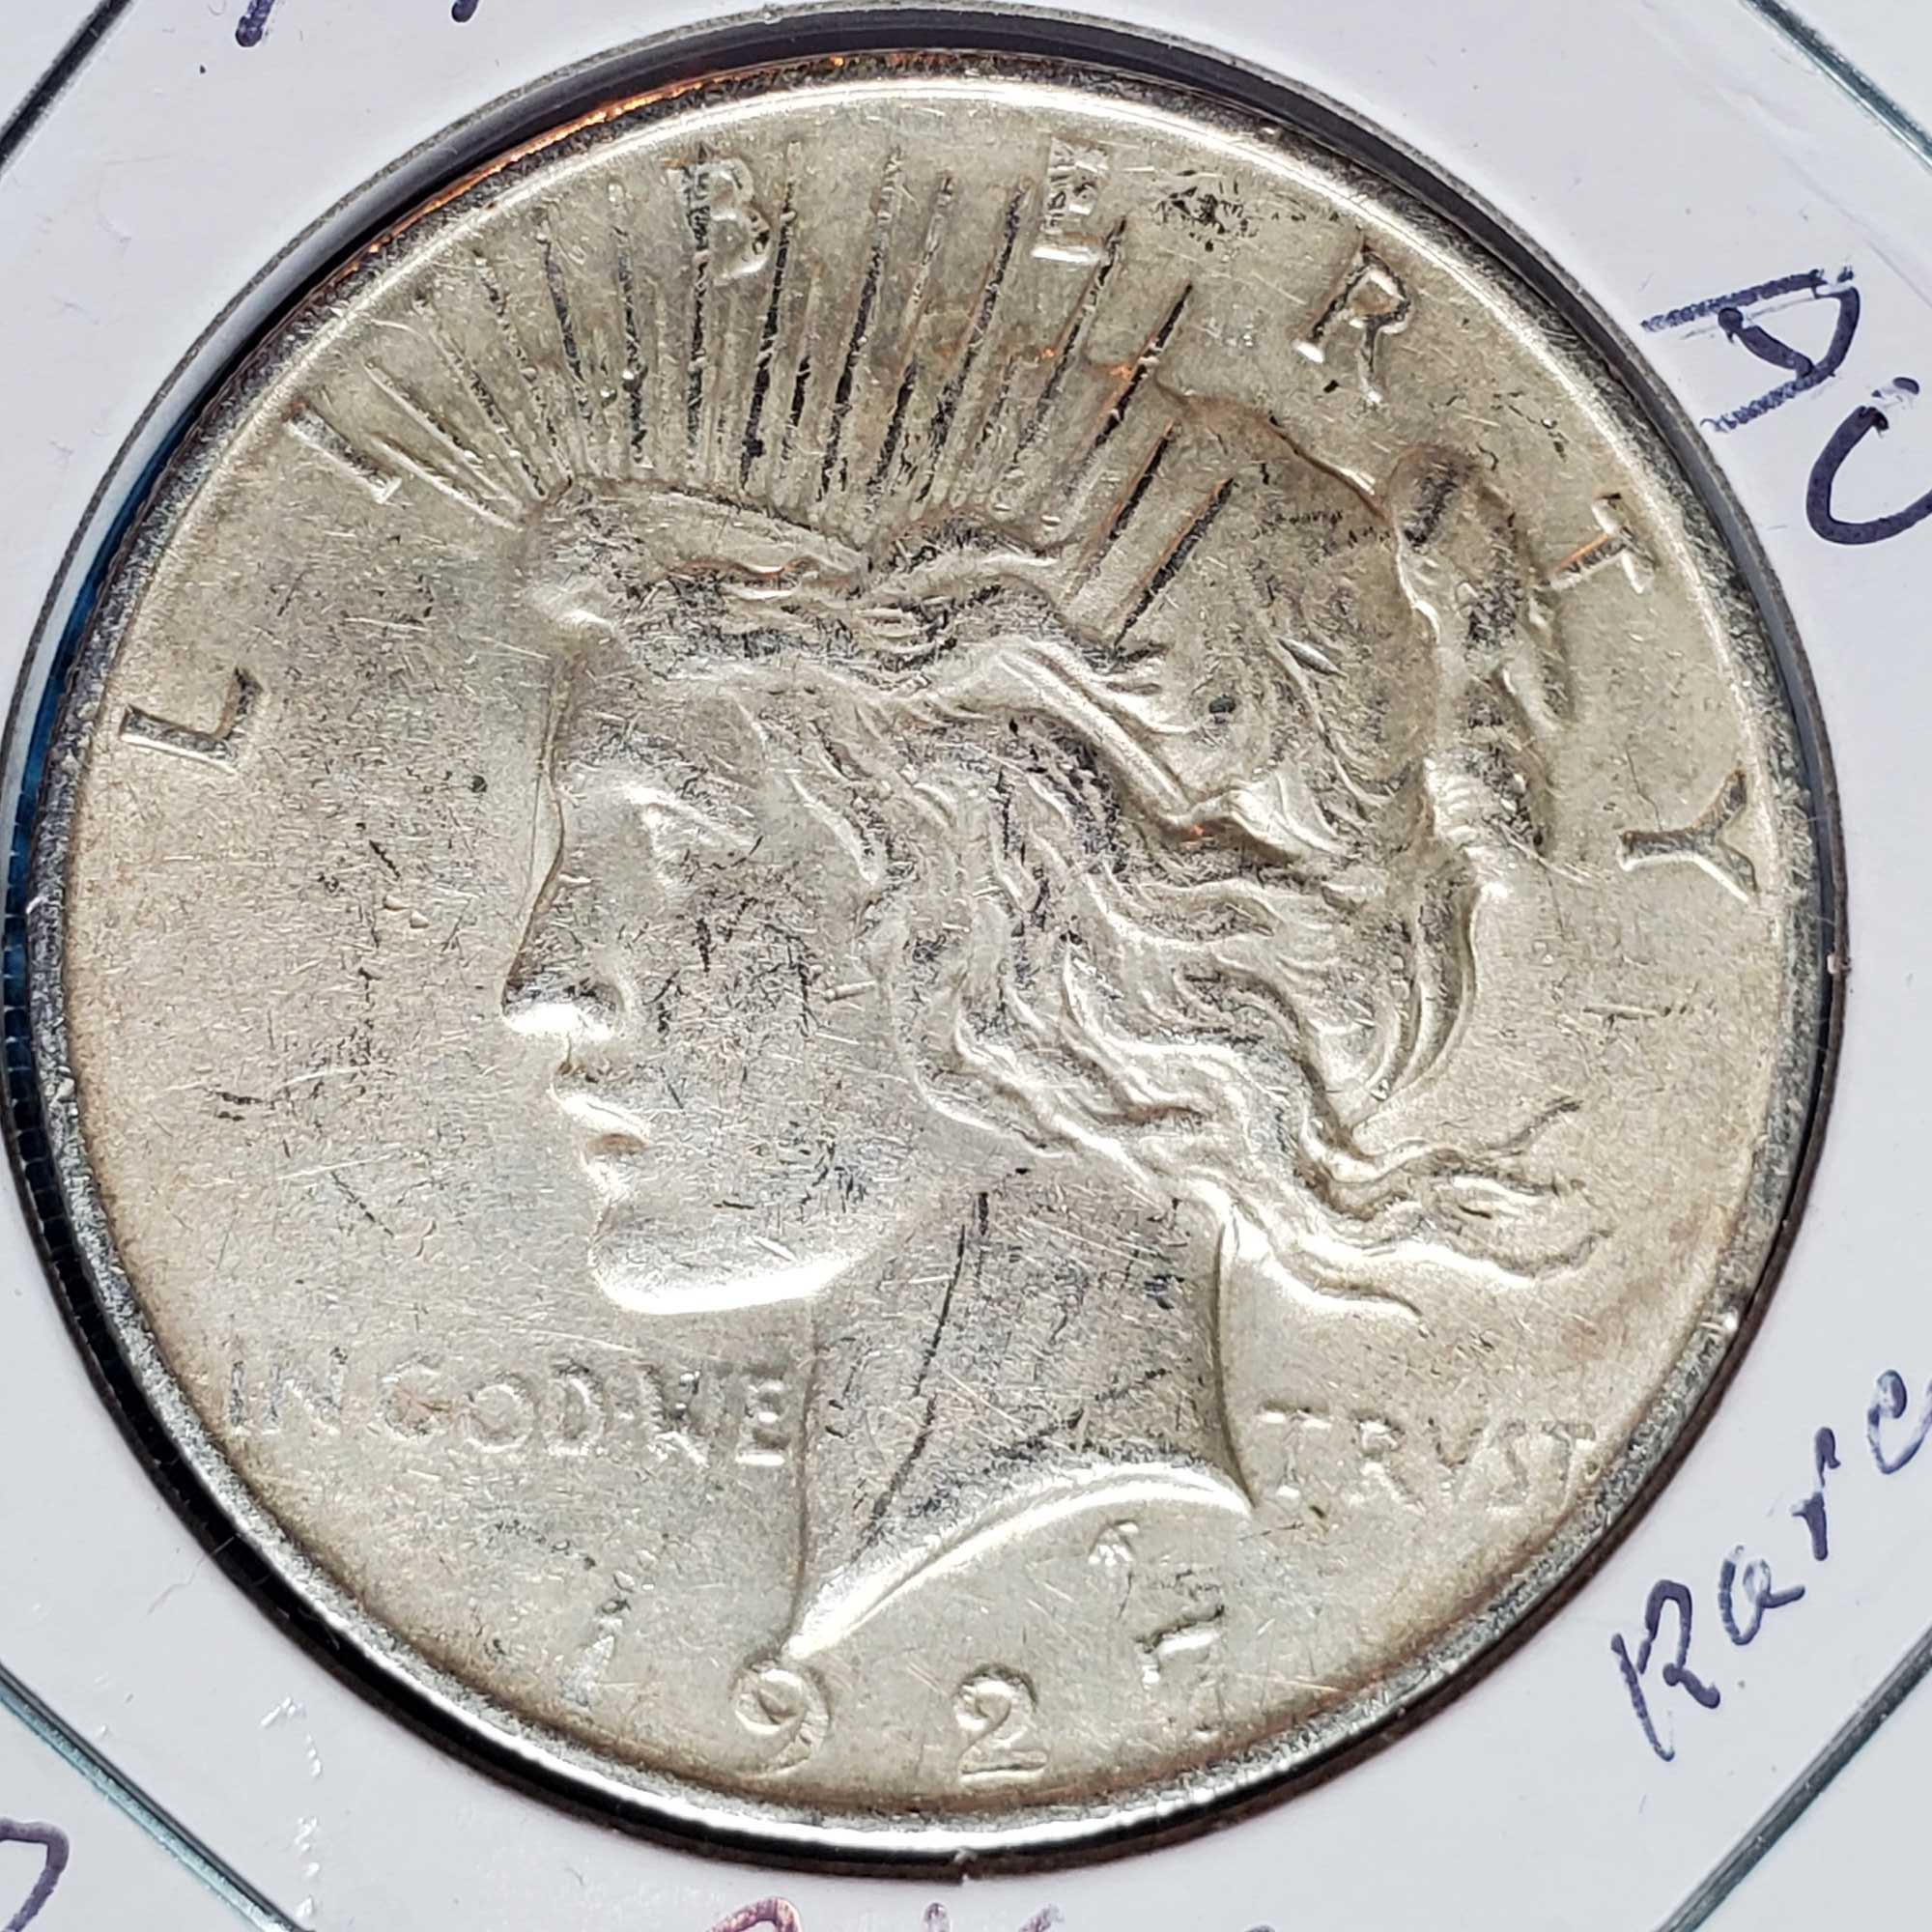 3 US Silver Peace Dollars - 2 BU 1922 and 1927-D